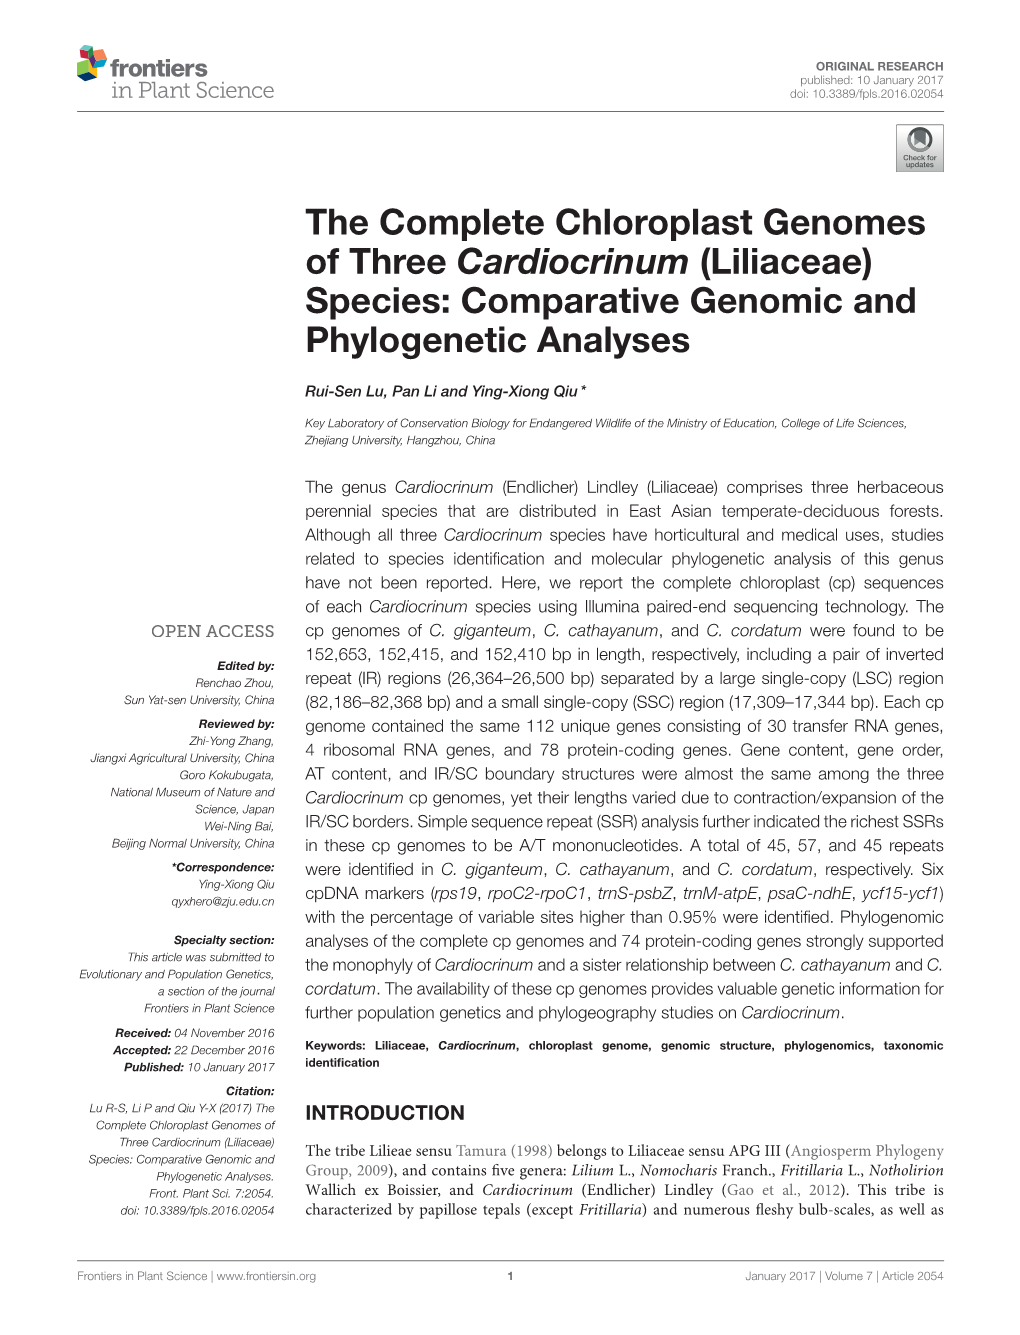 The Complete Chloroplast Genomes of Three Cardiocrinum (Liliaceae) Species: Comparative Genomic and Phylogenetic Analyses